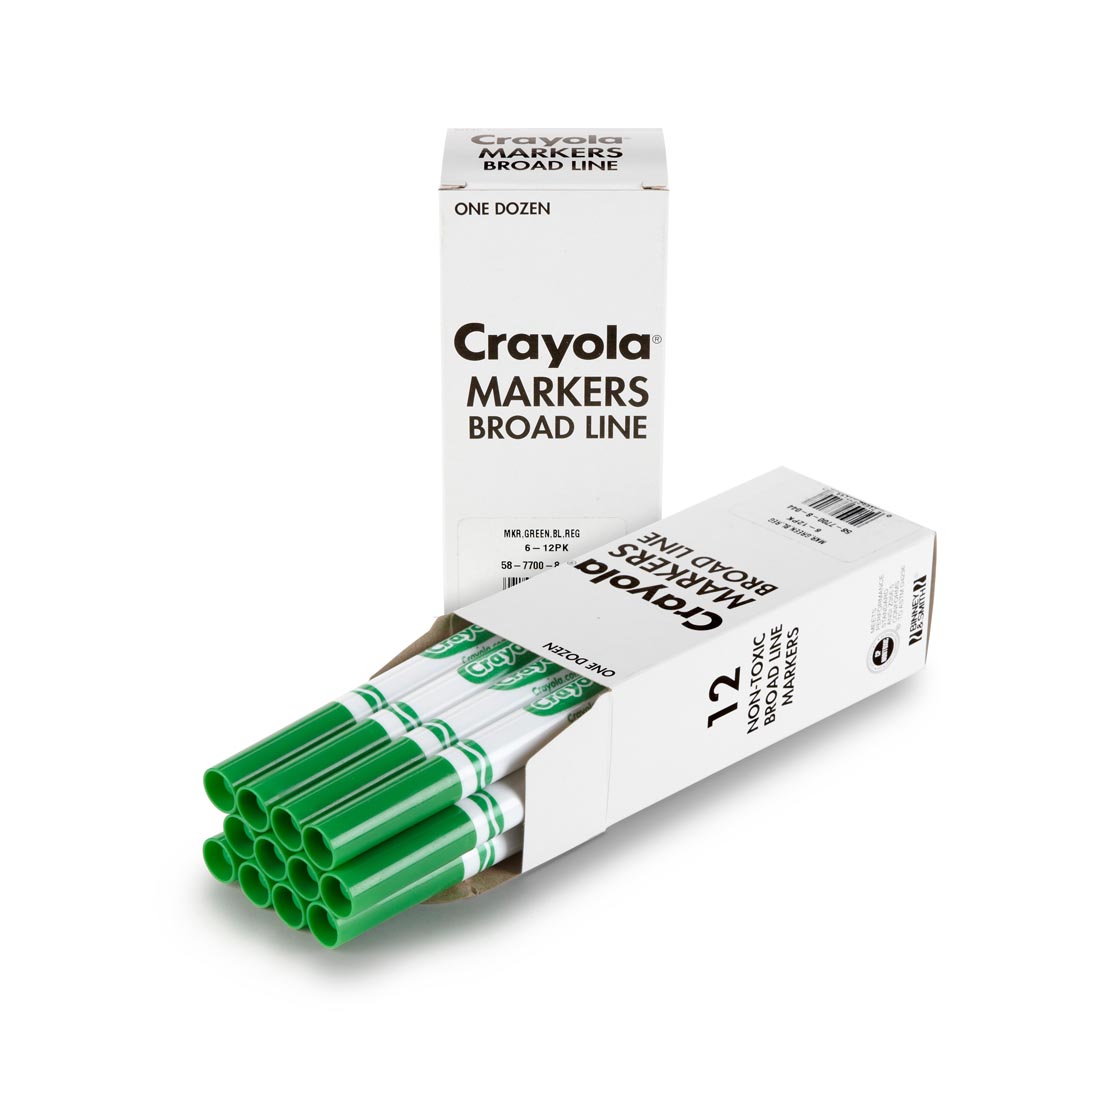 Box of Crayola Broad Line Marker Refills shown both closed and open with 12 Green Markers